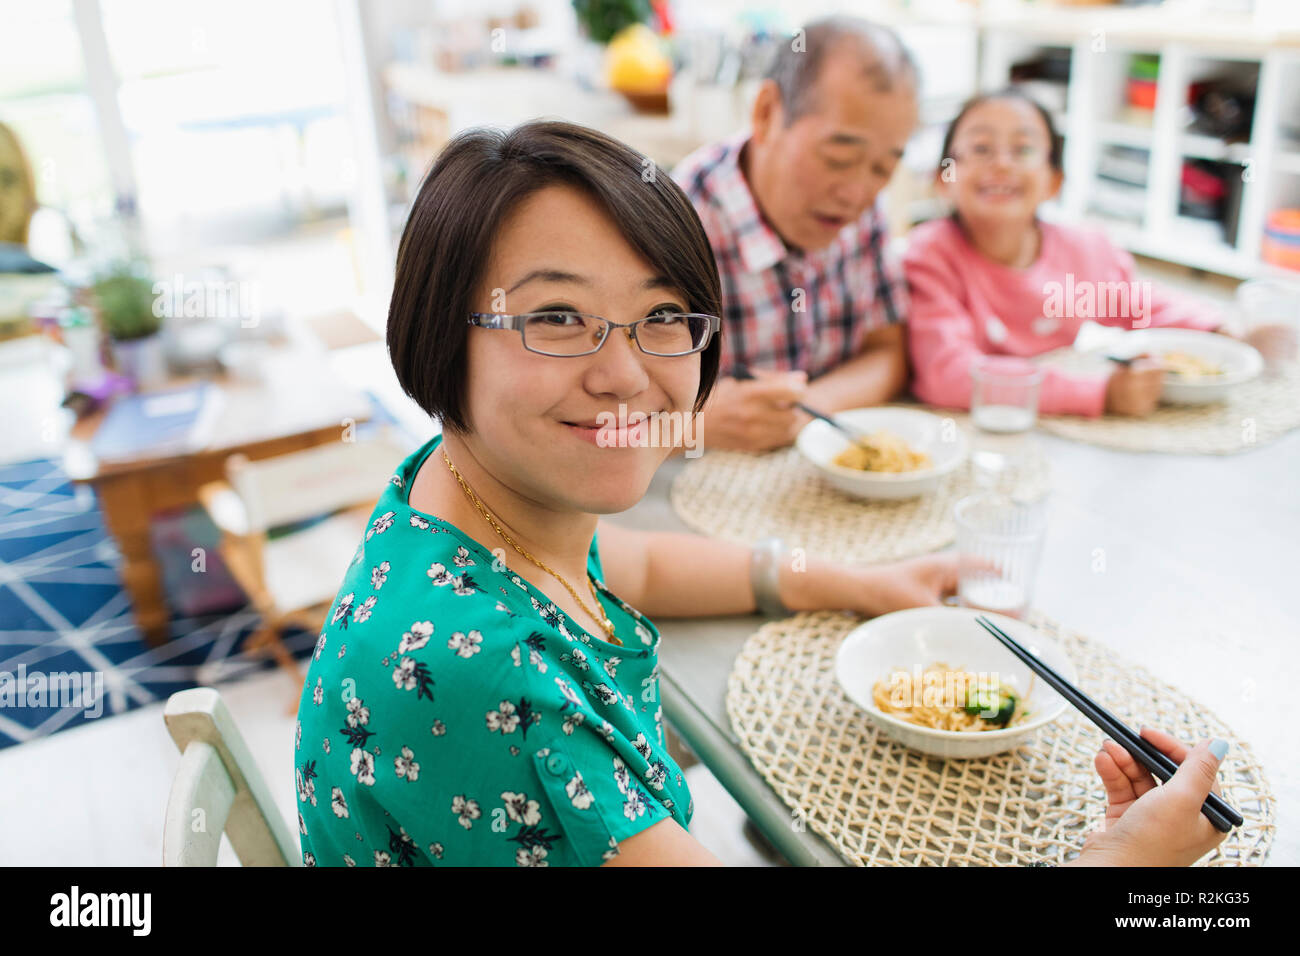 Portrait smiling woman eating noodles with family at table Stock Photo